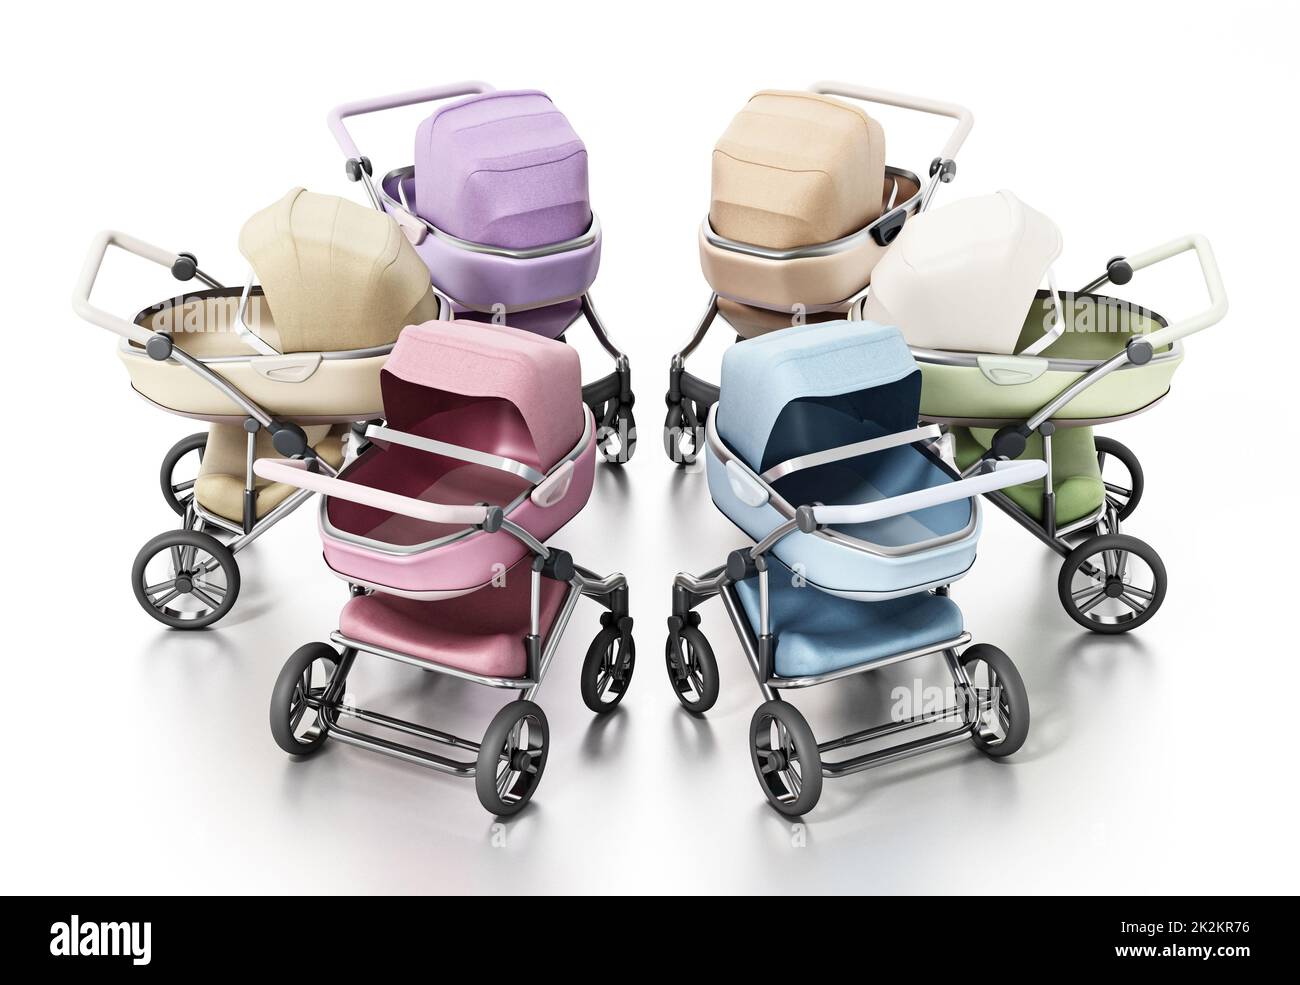 Group of vintage baby strollers isolated on white background. 3D illustration Stock Photo